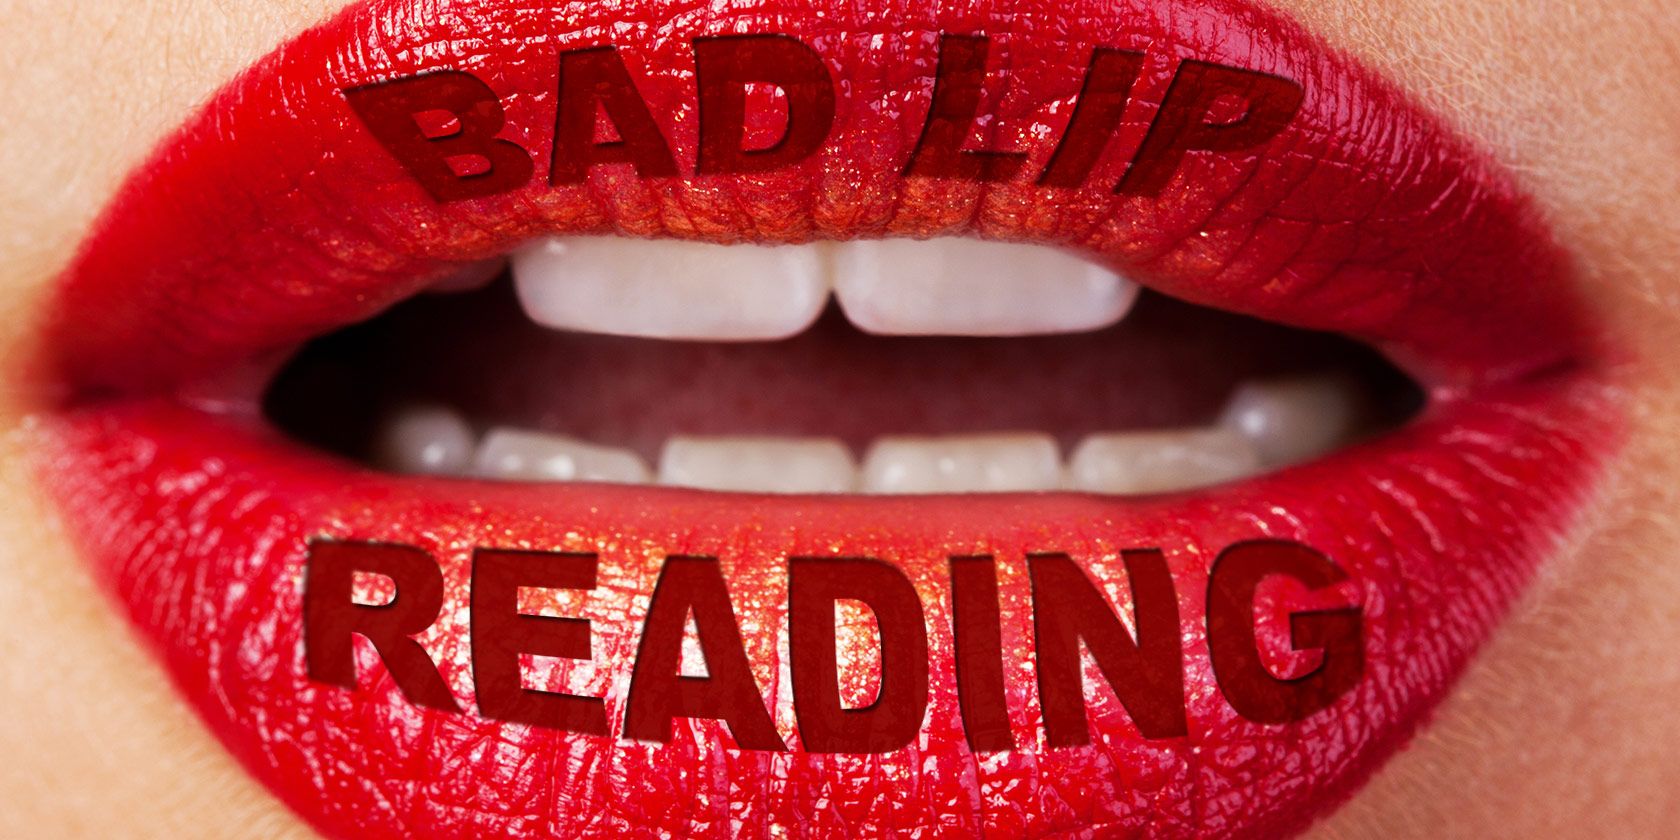 Need A Laugh? Brighten Up Your Day With These Bad Lip Readings